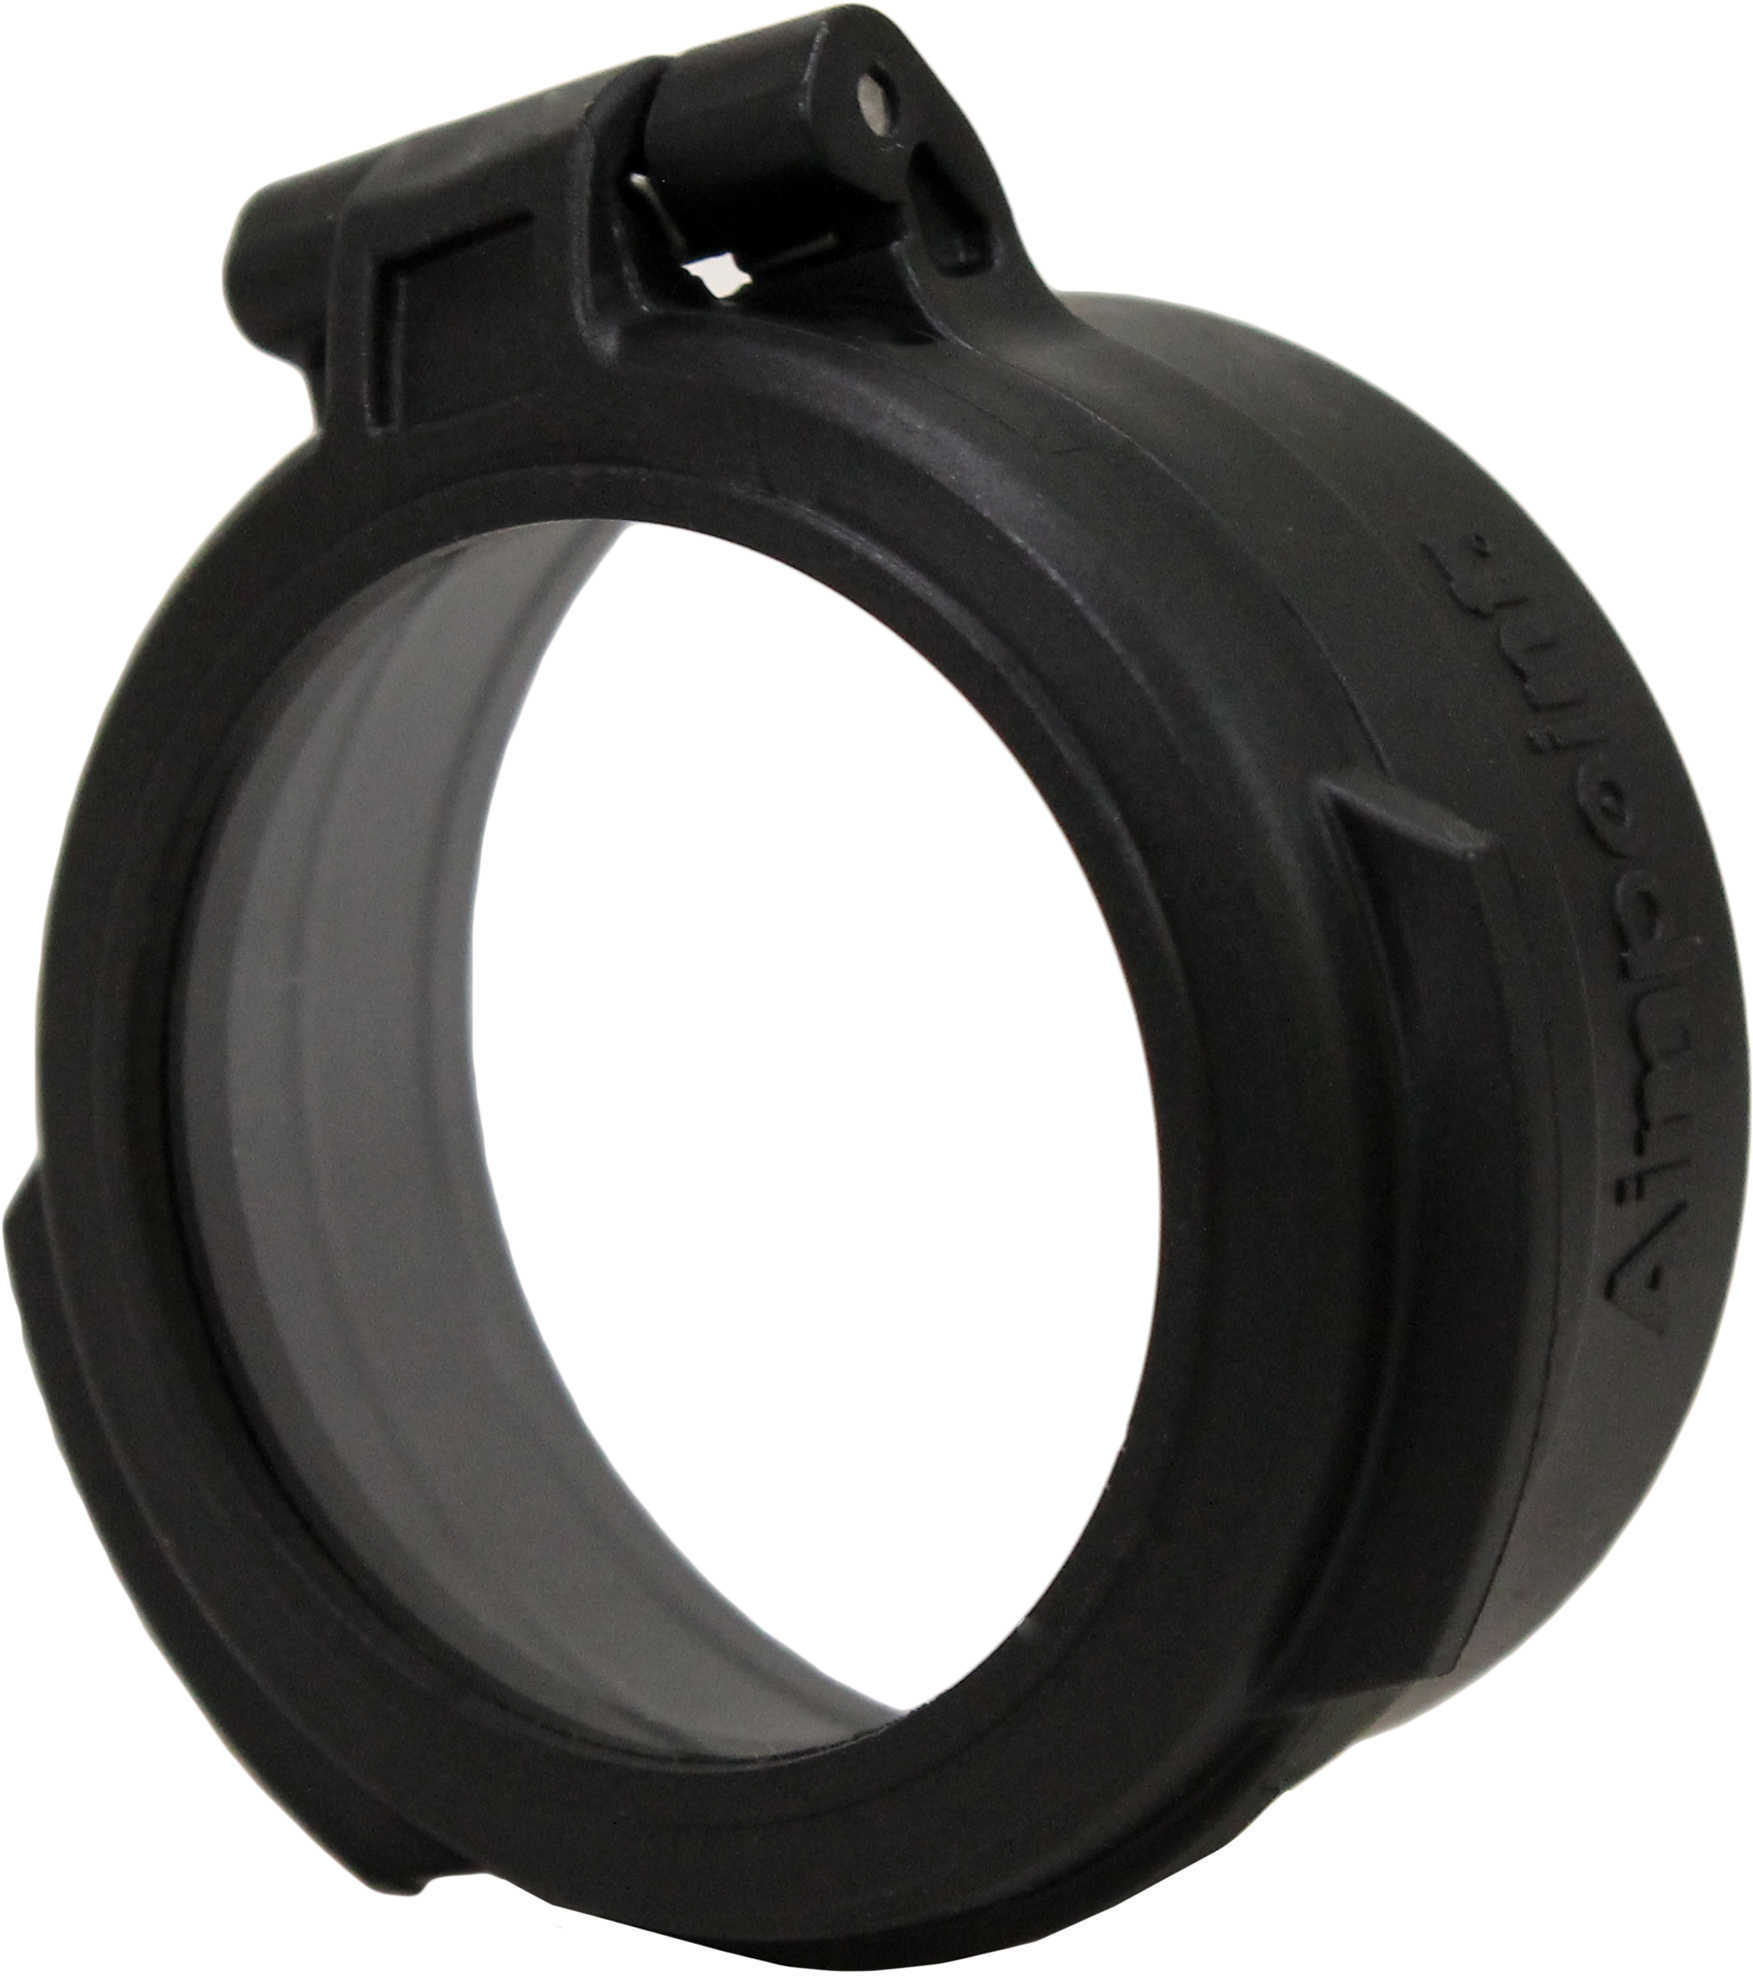 Aimpoint Lens Cover Front Flip-Up ST H30 Kit Md: 200353